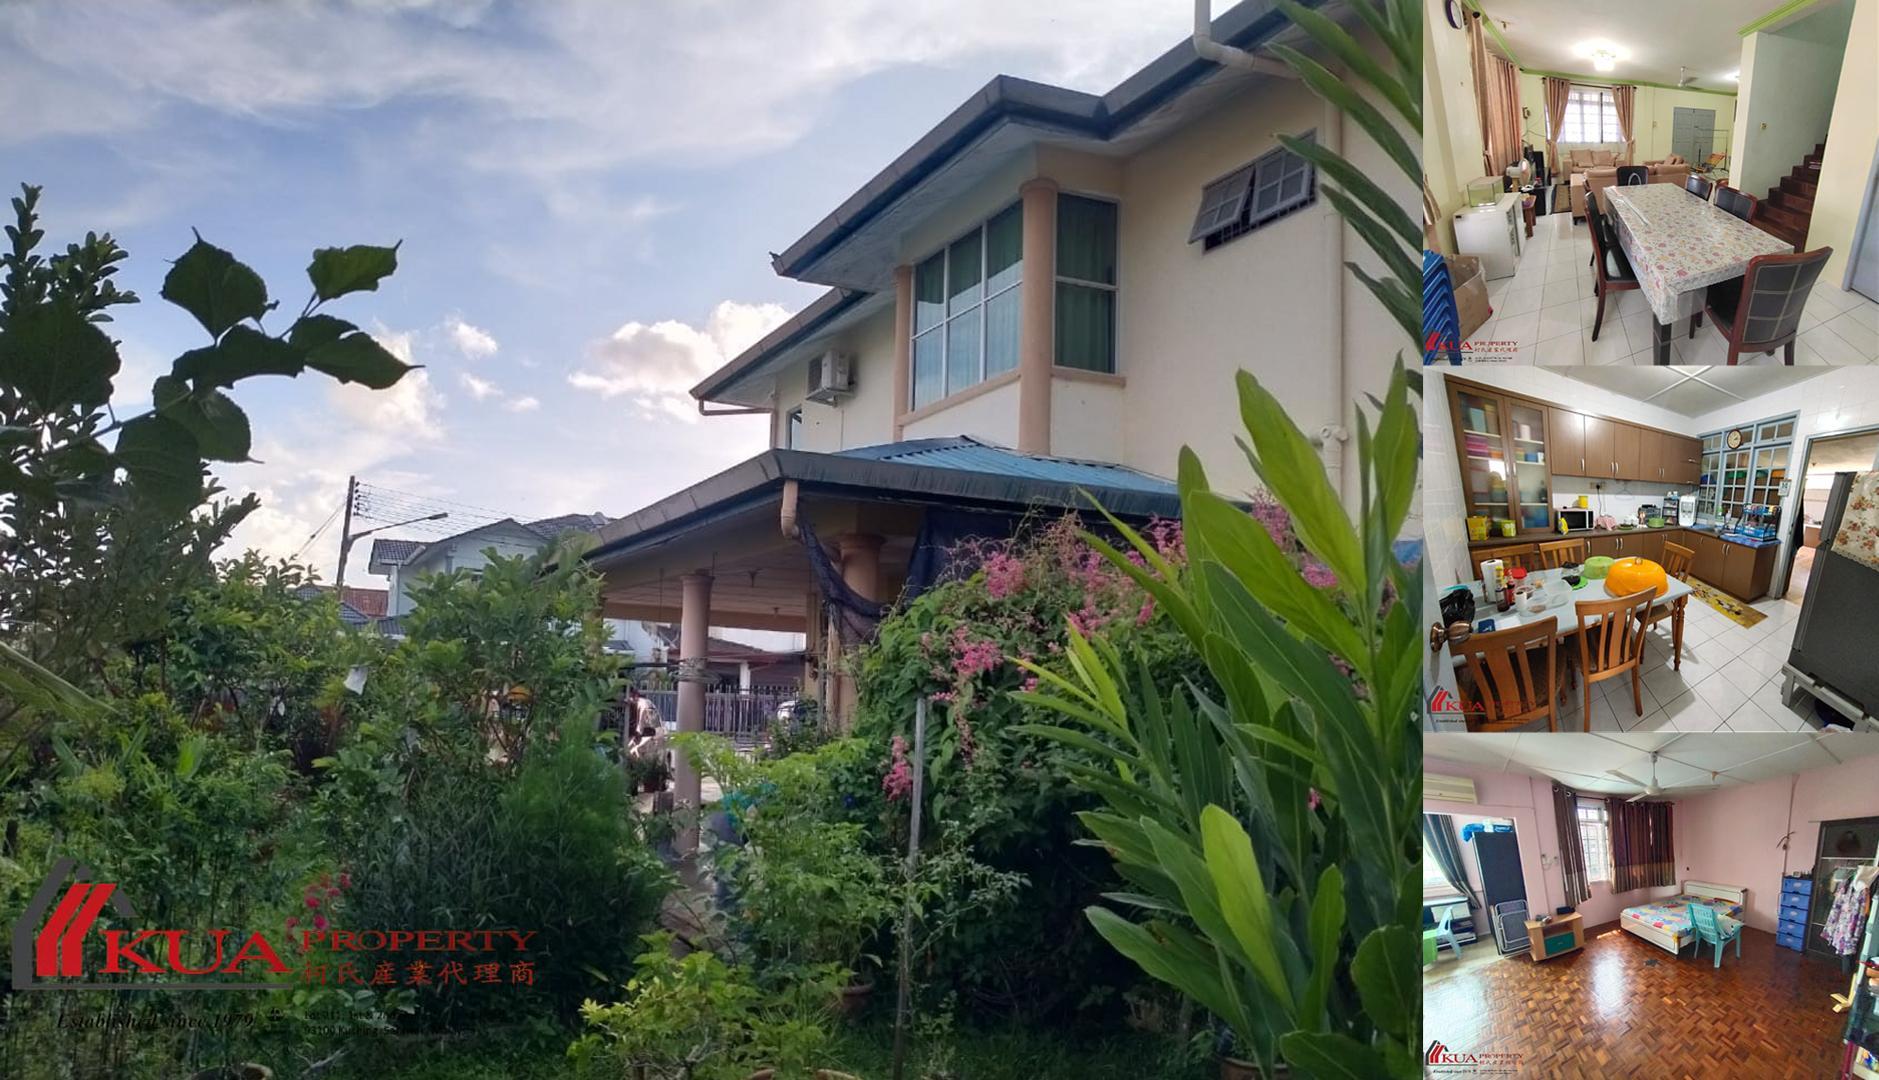 Double Storey Semi-Detached House For Sale! Located at Swee Joo Park, Kuching